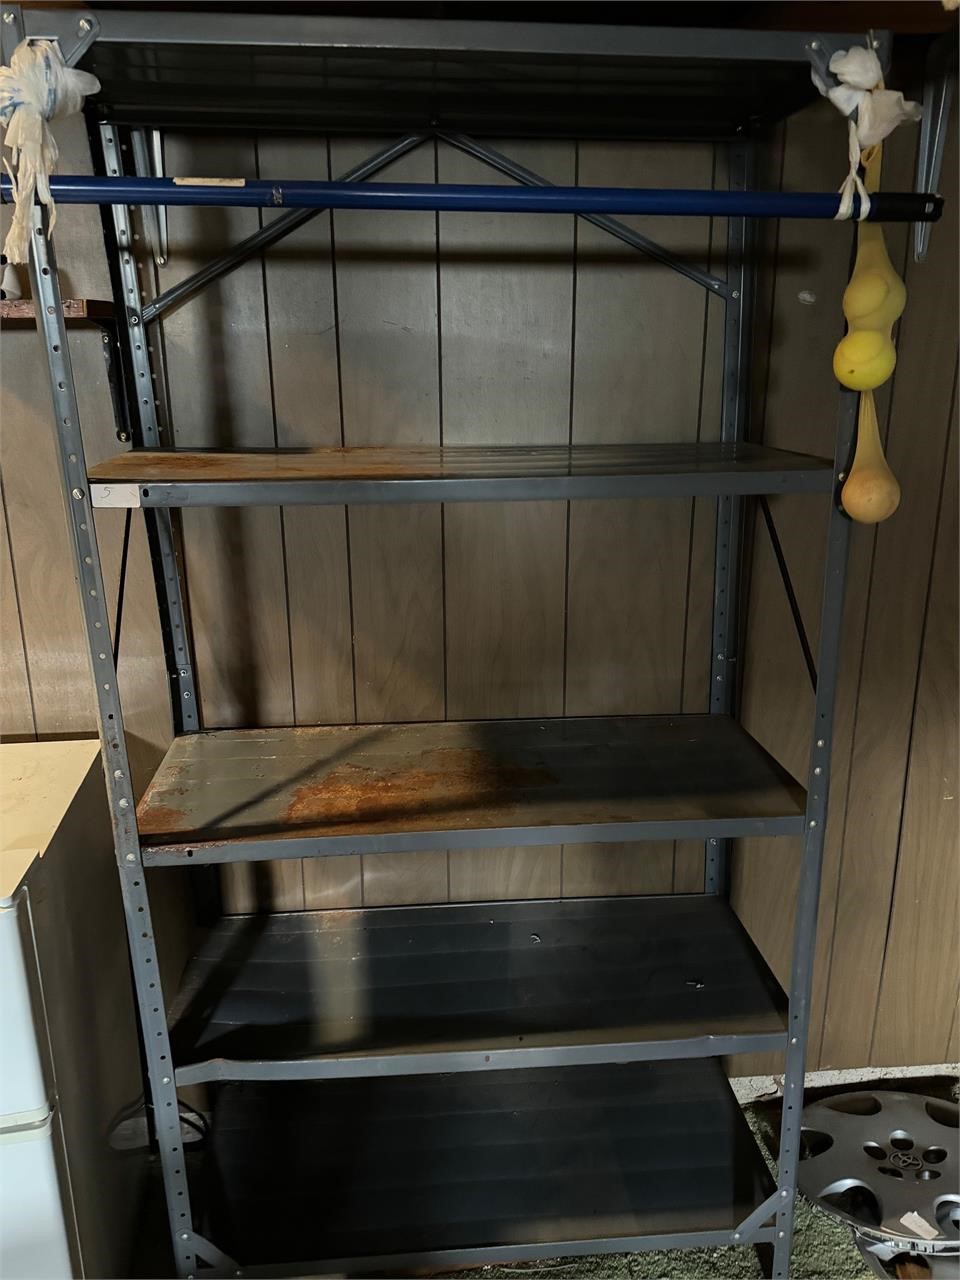 5 TIER SHELVING UNIT BENT WITH A LITTLE RUST